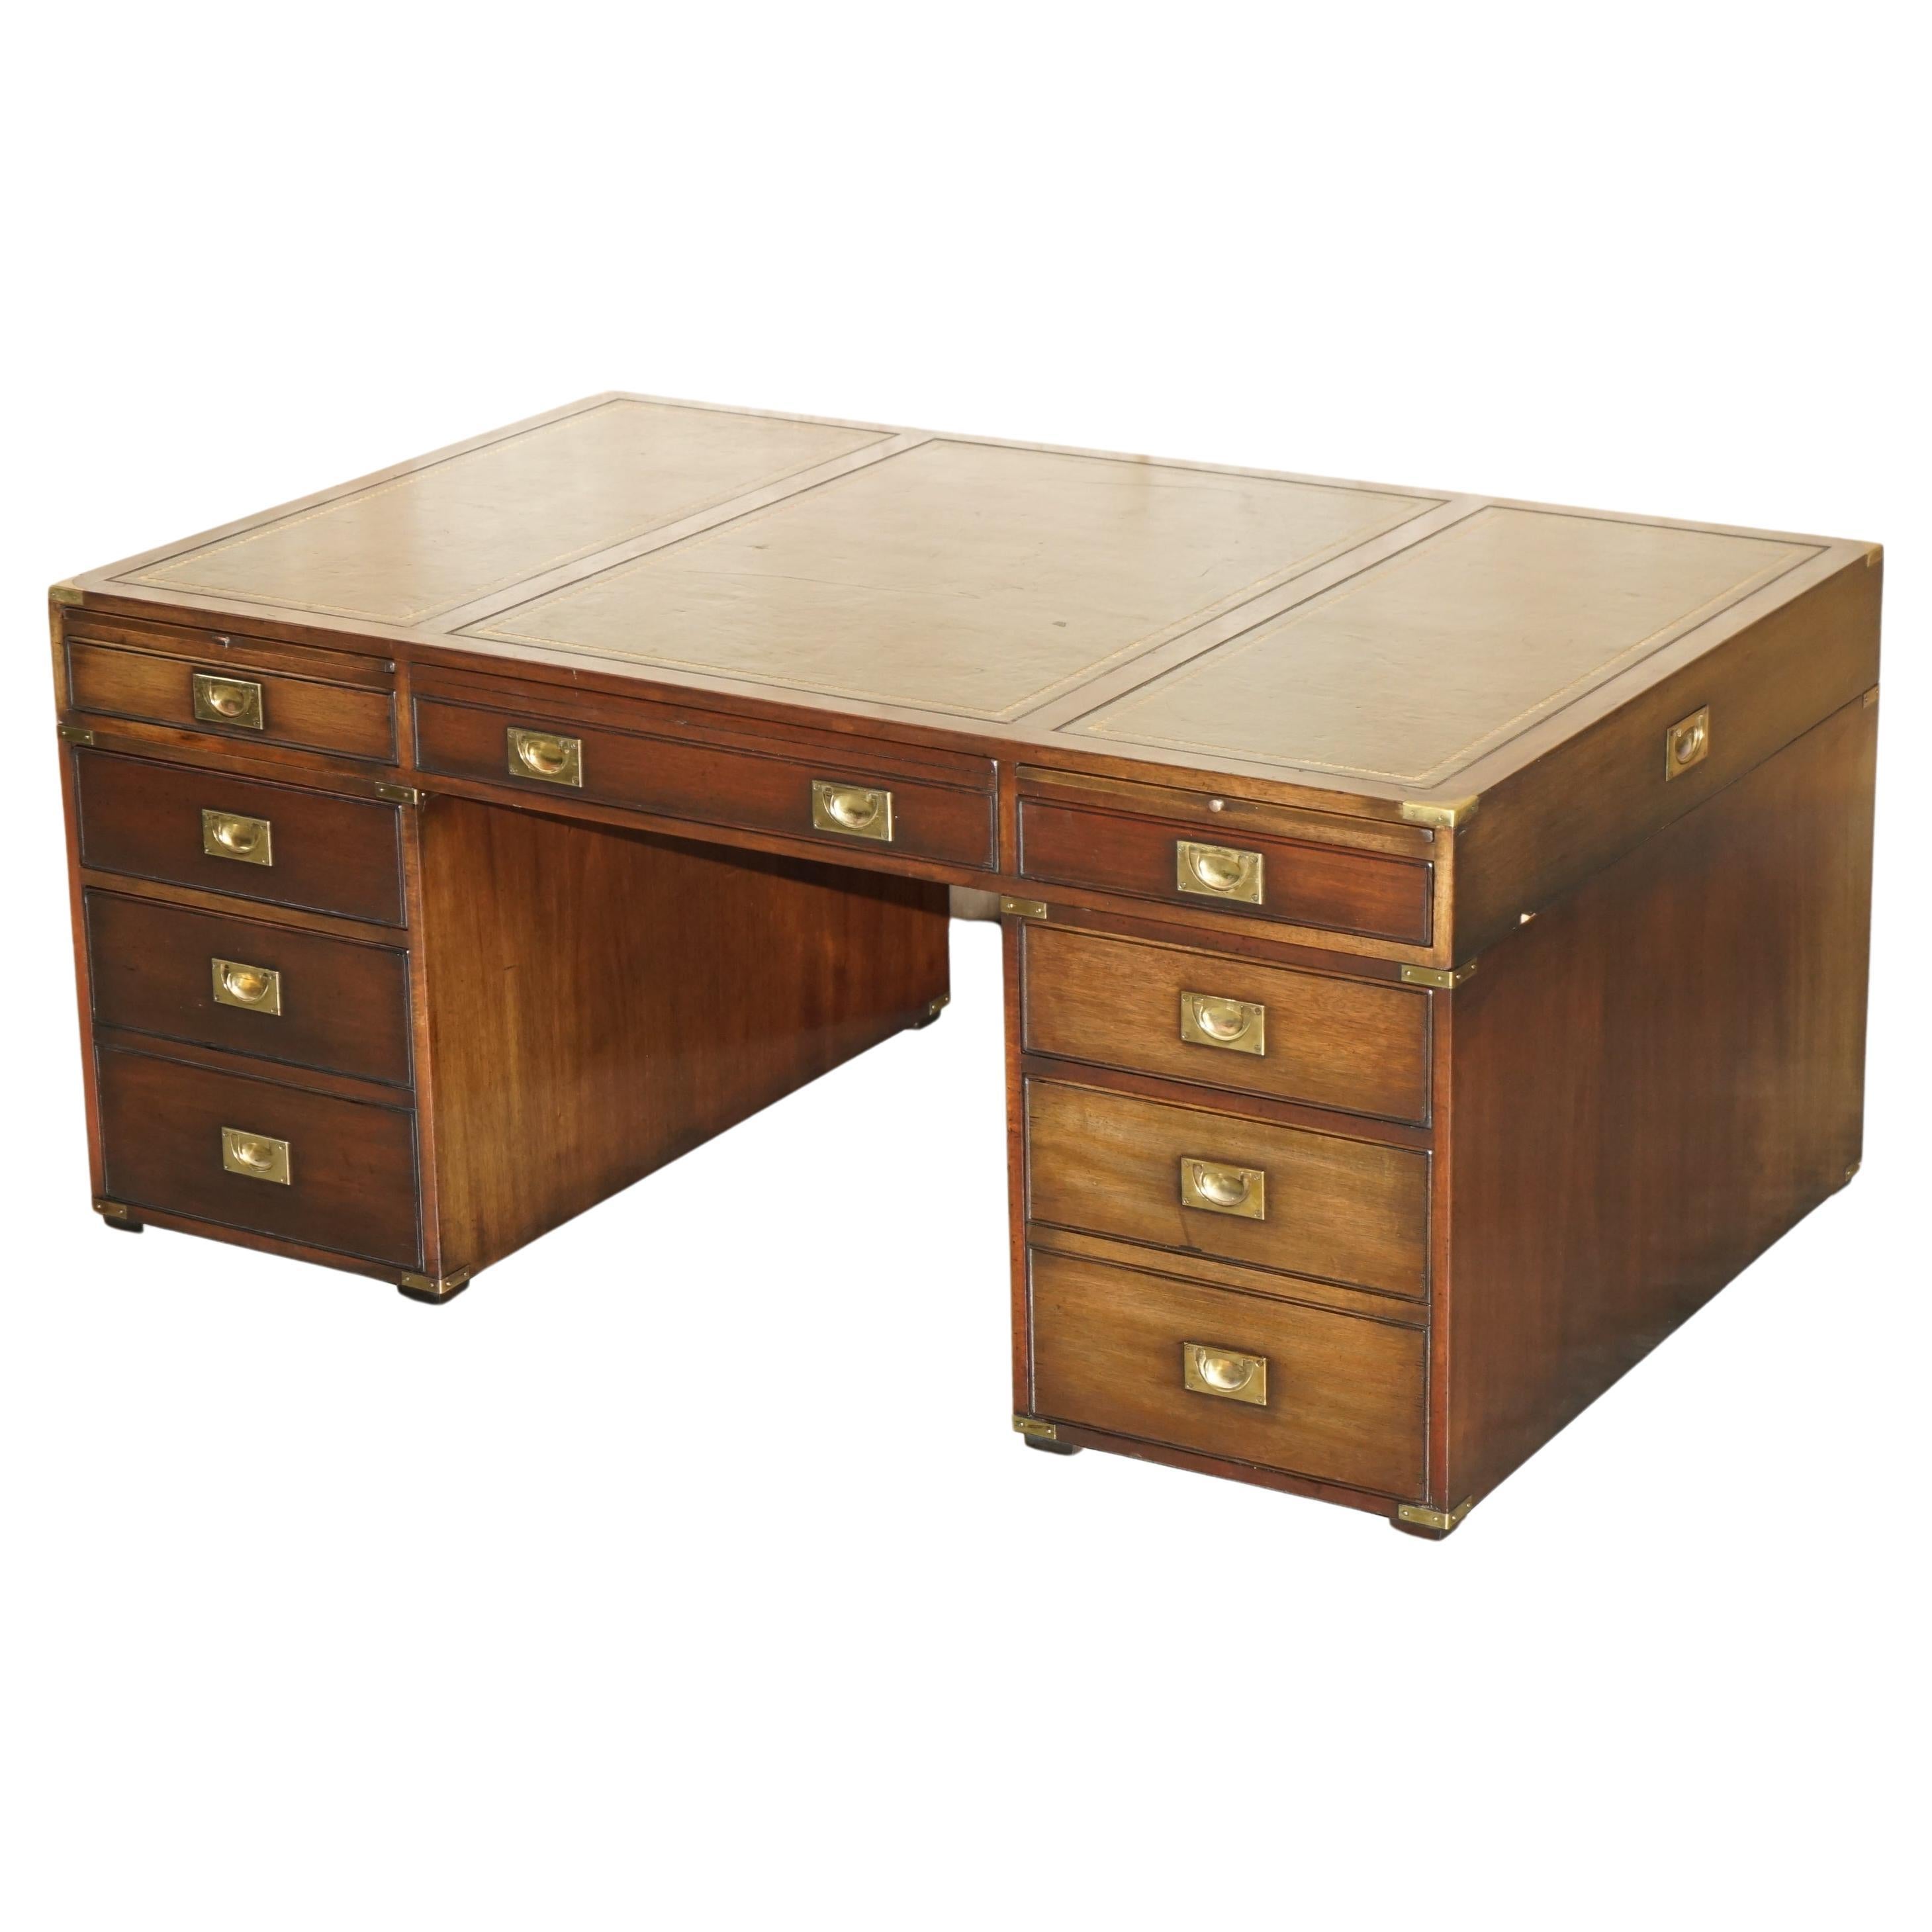 HARRODS KENNEDY DOUBLE SIDED TWO PERSON MILITARY CAMPAIGN TWiN PEDESTAL DESK